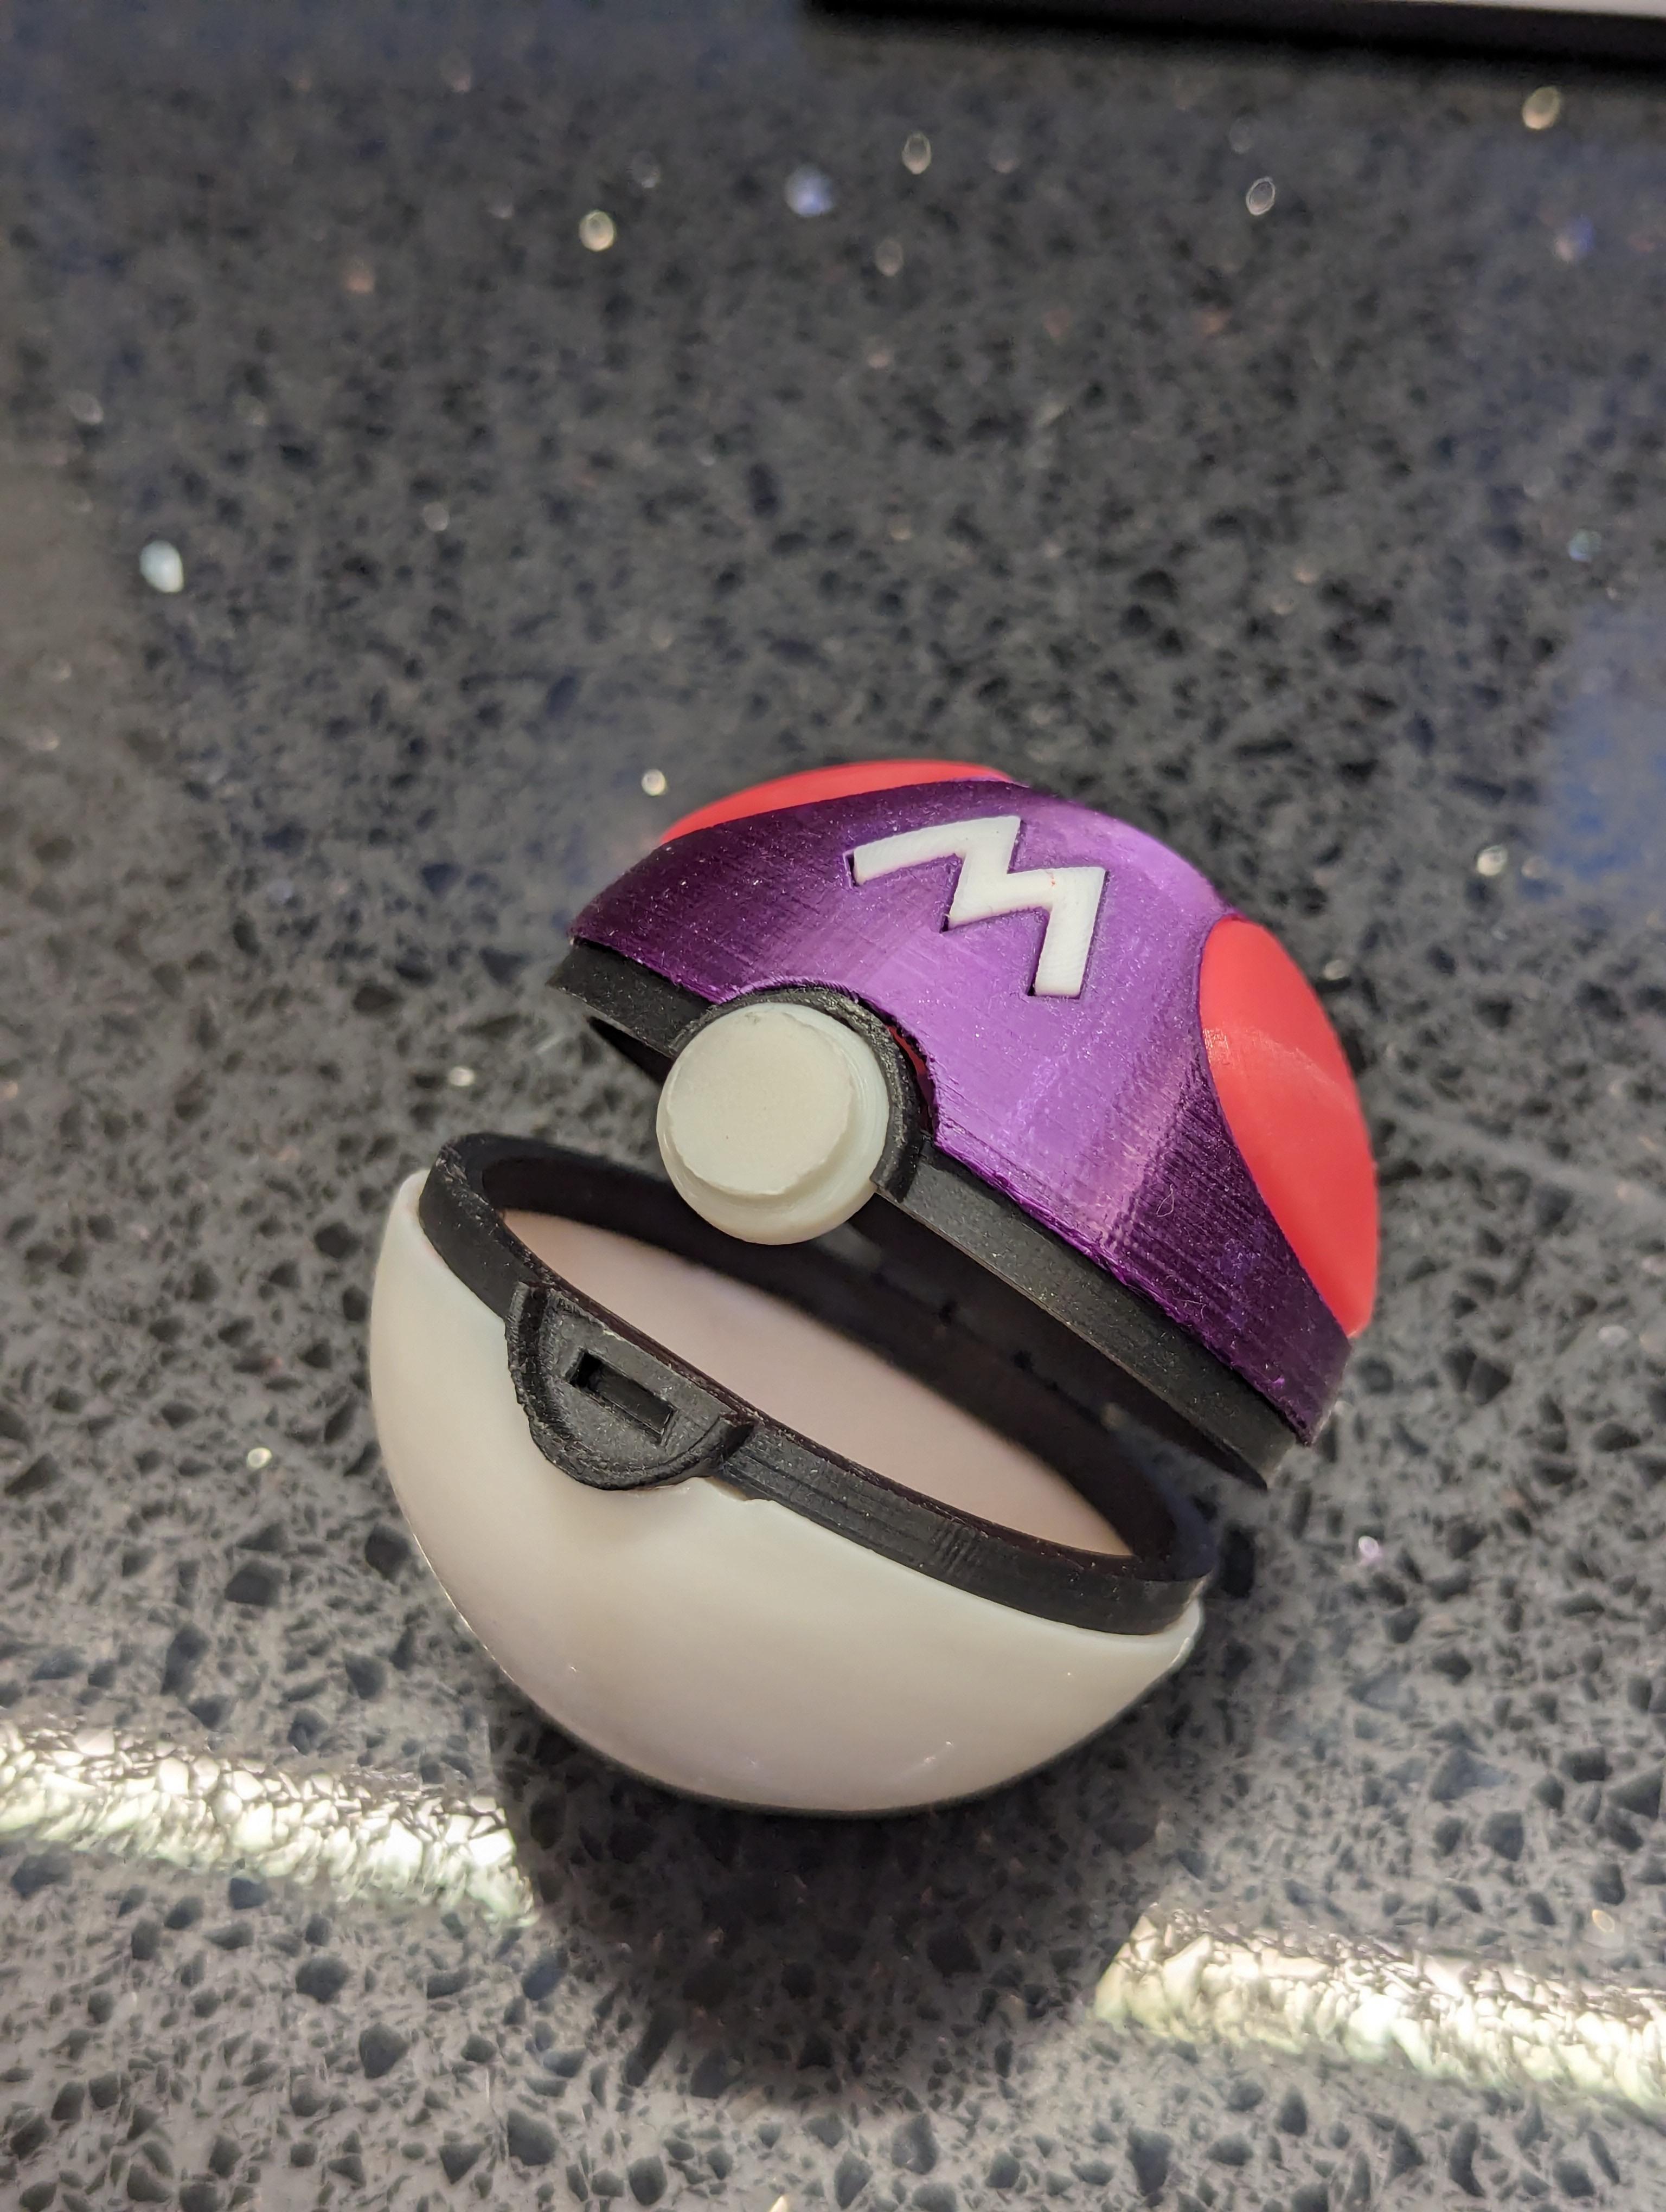 Masterball - front view opened - 3d model